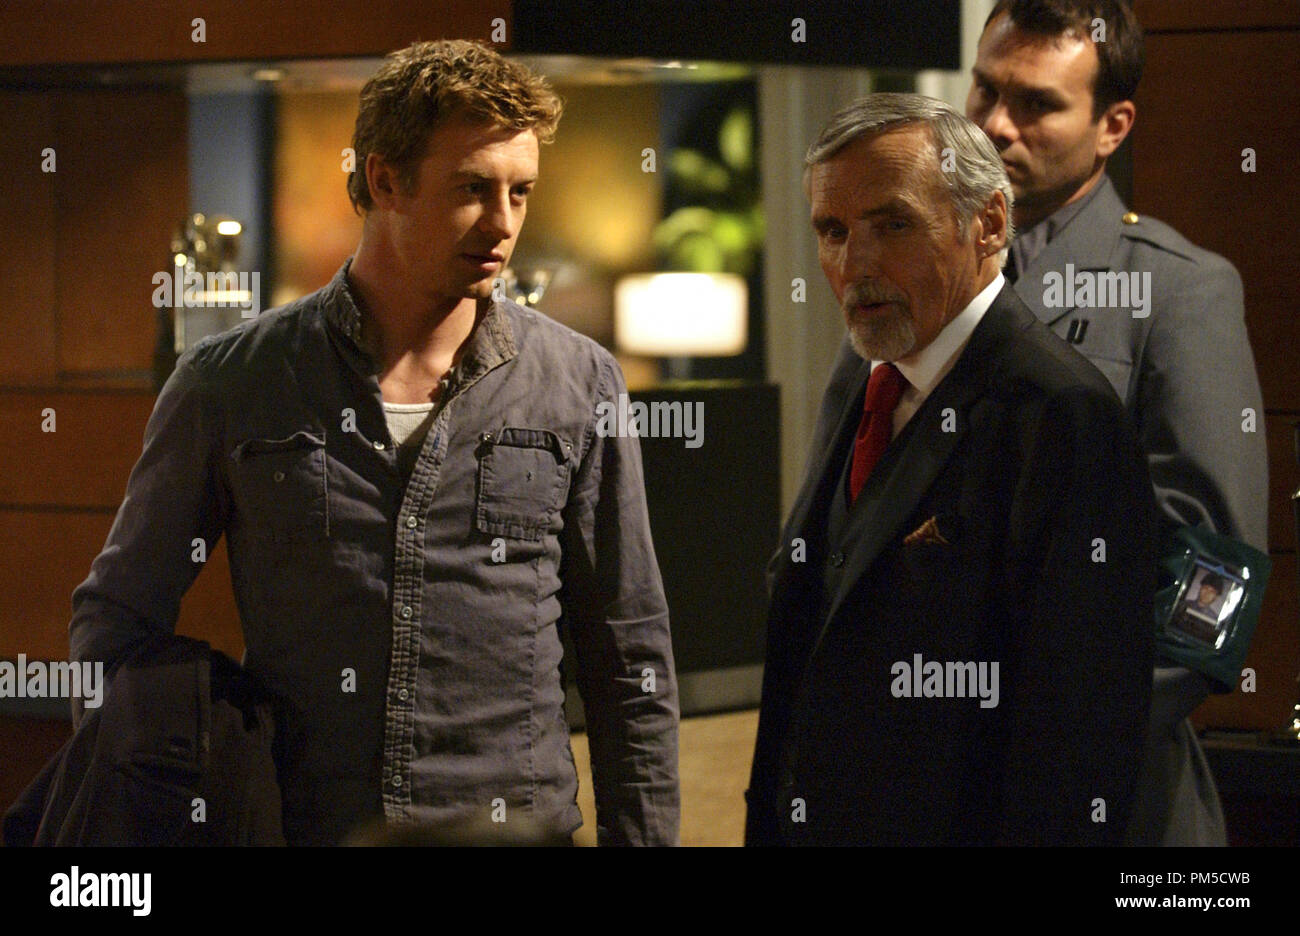 Film Still / Publicity Still from 'George A. Romero's Land of the Dead'  Simon Baker, Dennis Hopper, Matt Birman © 2005 Universal Studios  File Reference # 307361251THA  For Editorial Use Only -  All Rights Reserved Stock Photo